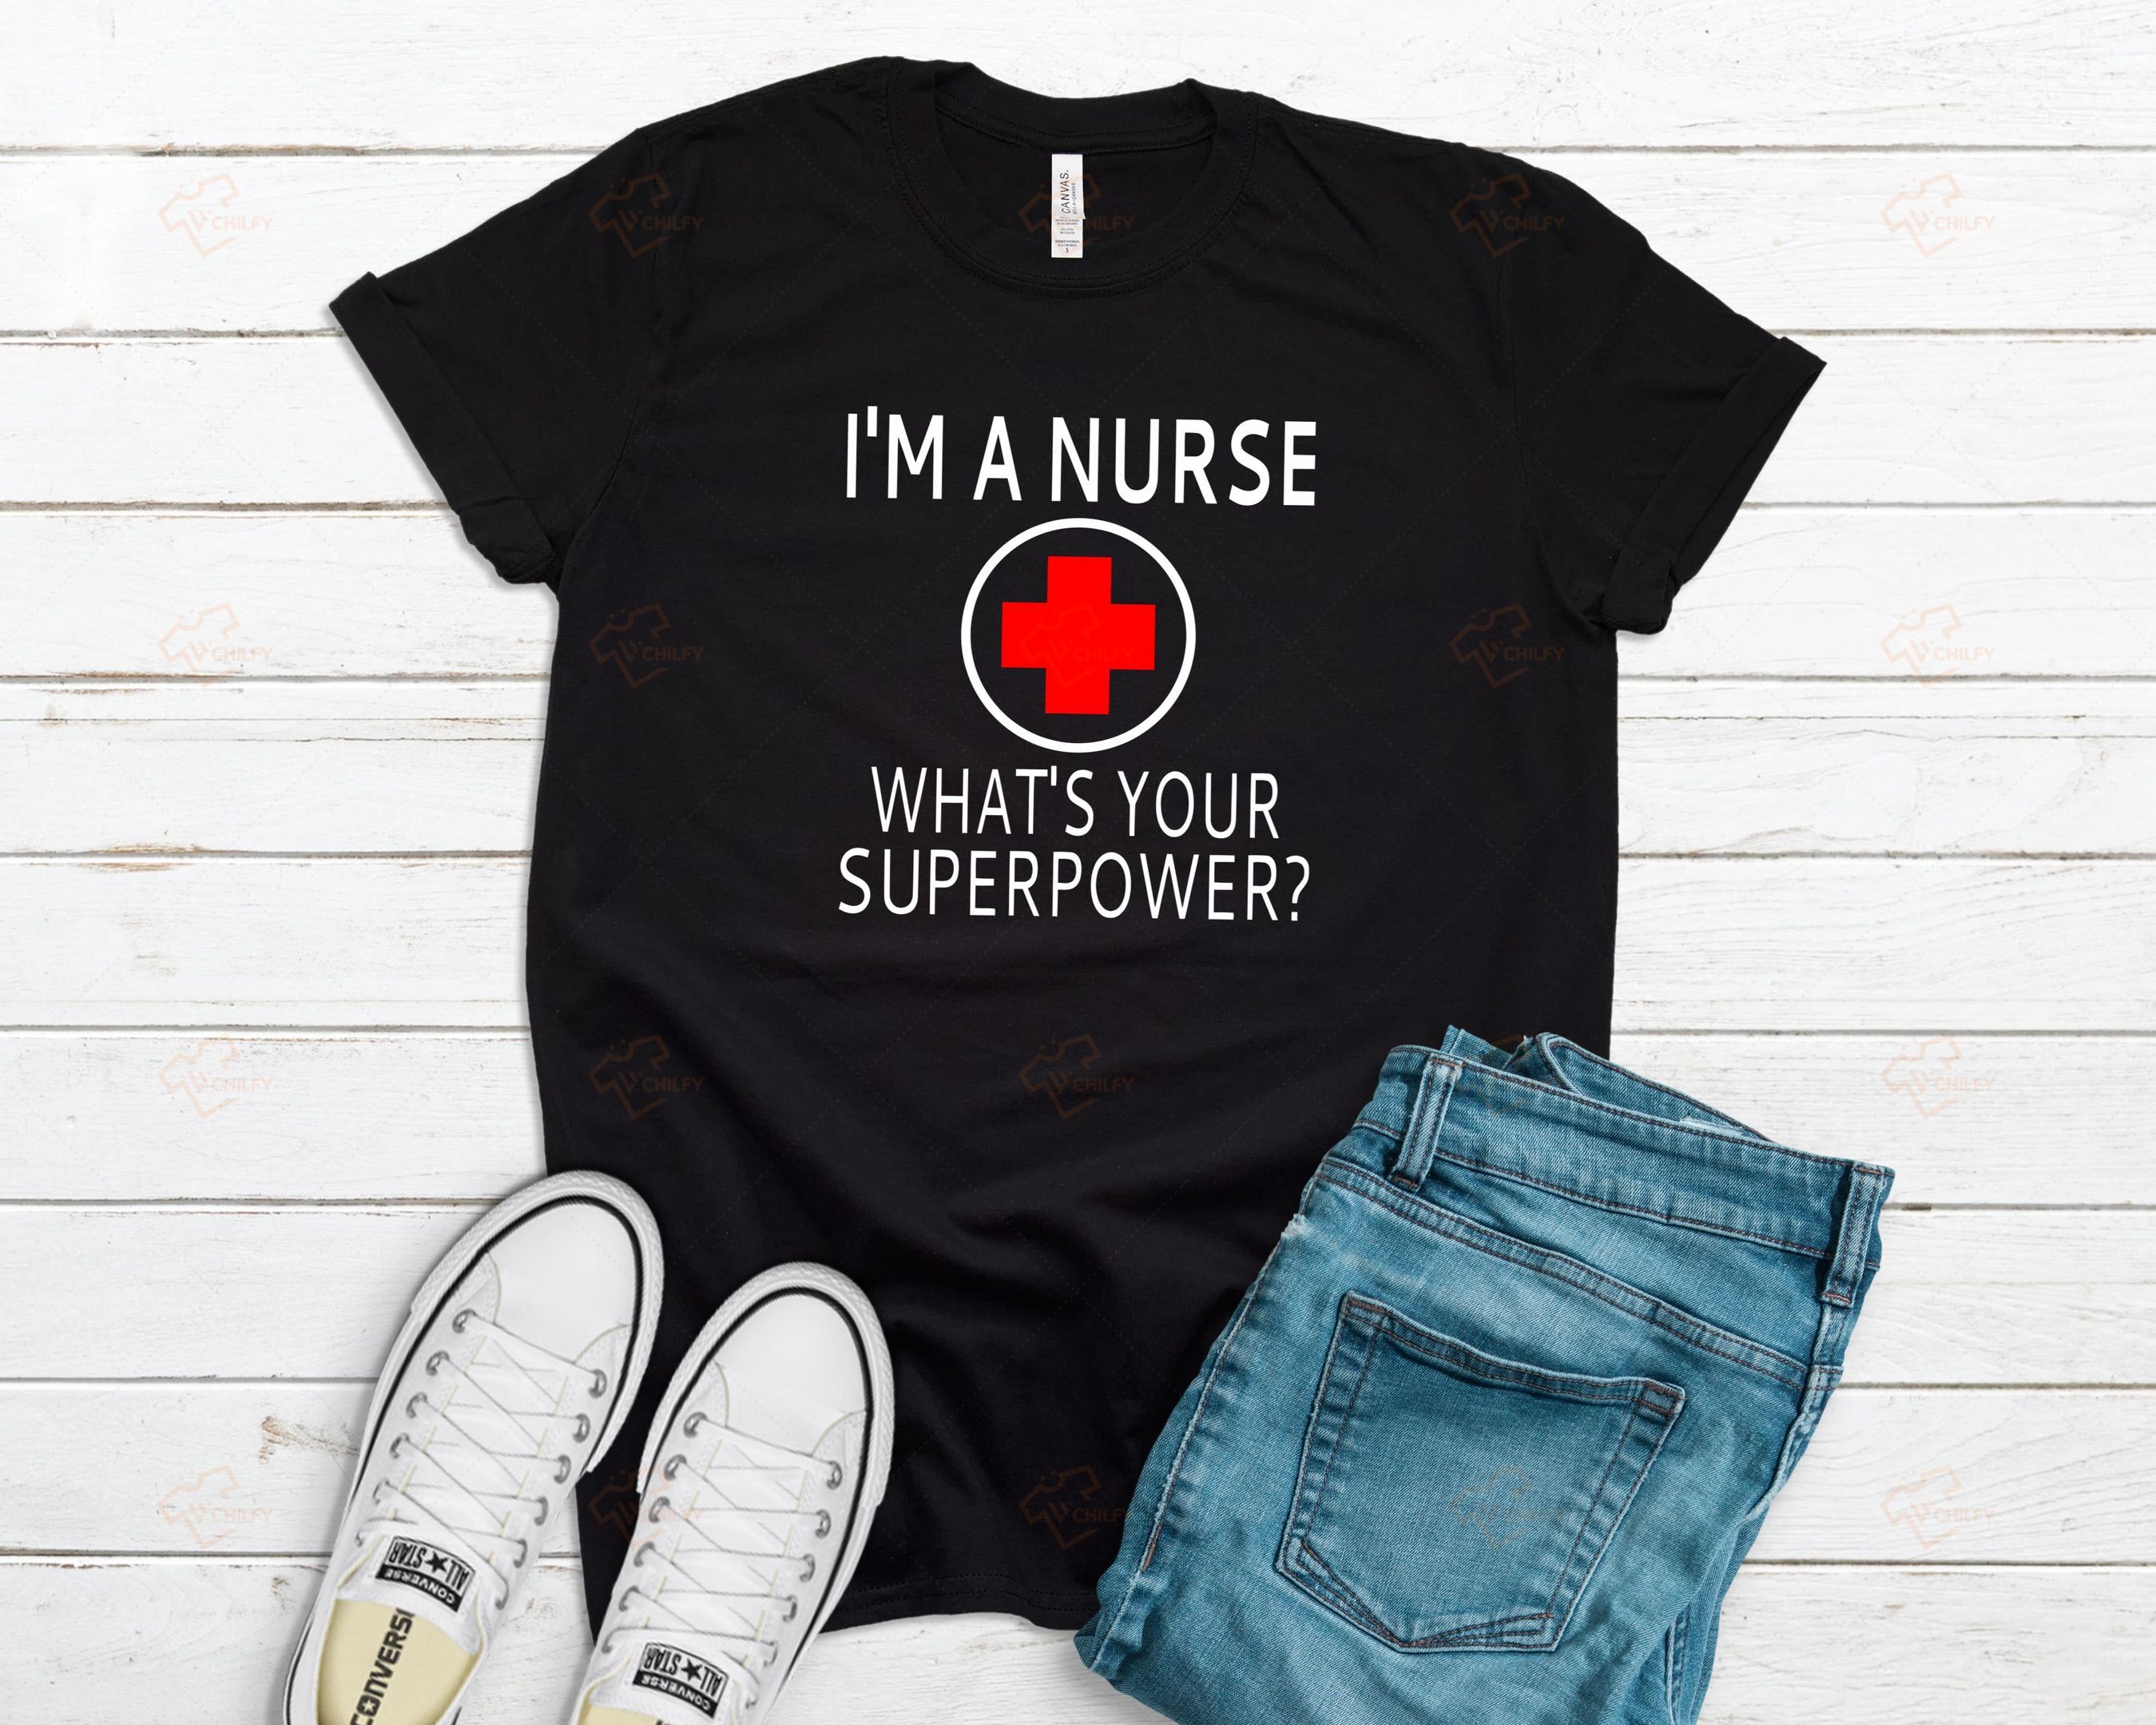 I’m A Nurse What’s Your Superpower Tshirt, Funny Nurse Shirt, Registered Nurse Tee, Gift For Nurse